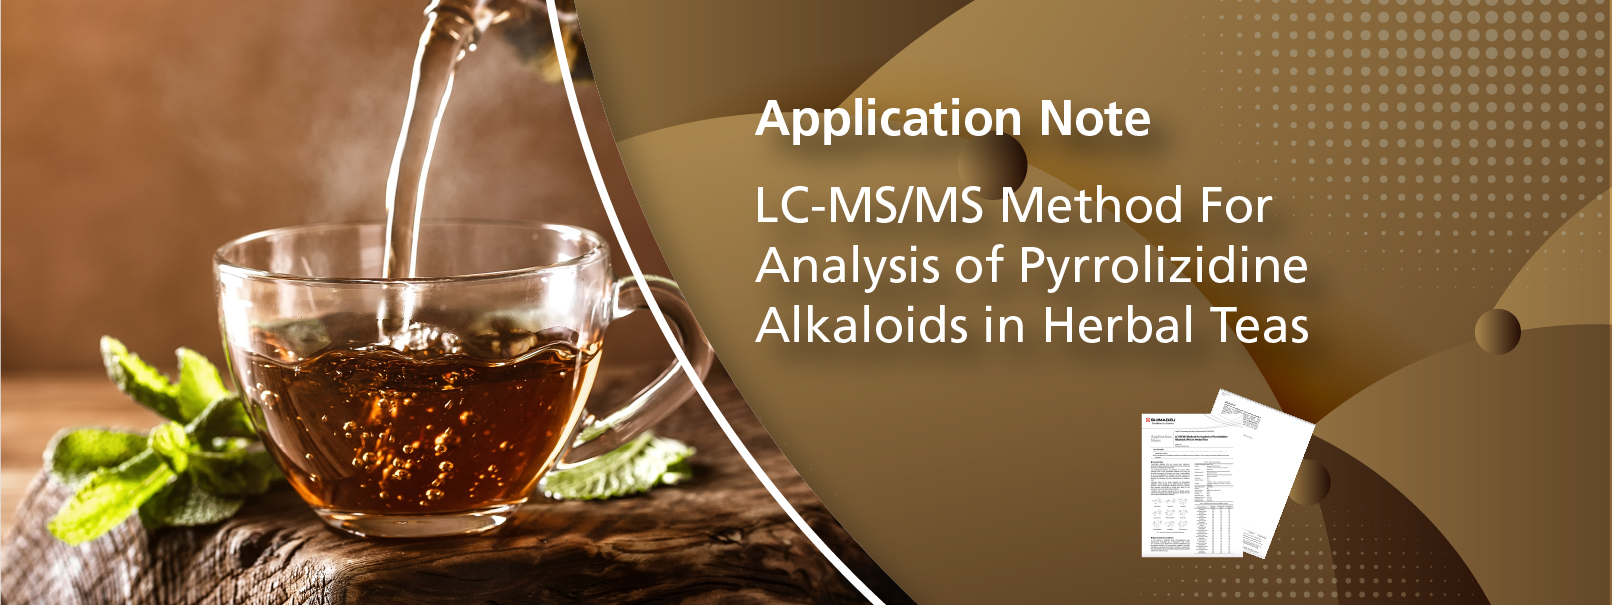 LC-MS/MS Method for Analysis of Pyrrolizidine Alkaloids in Herbal Teas